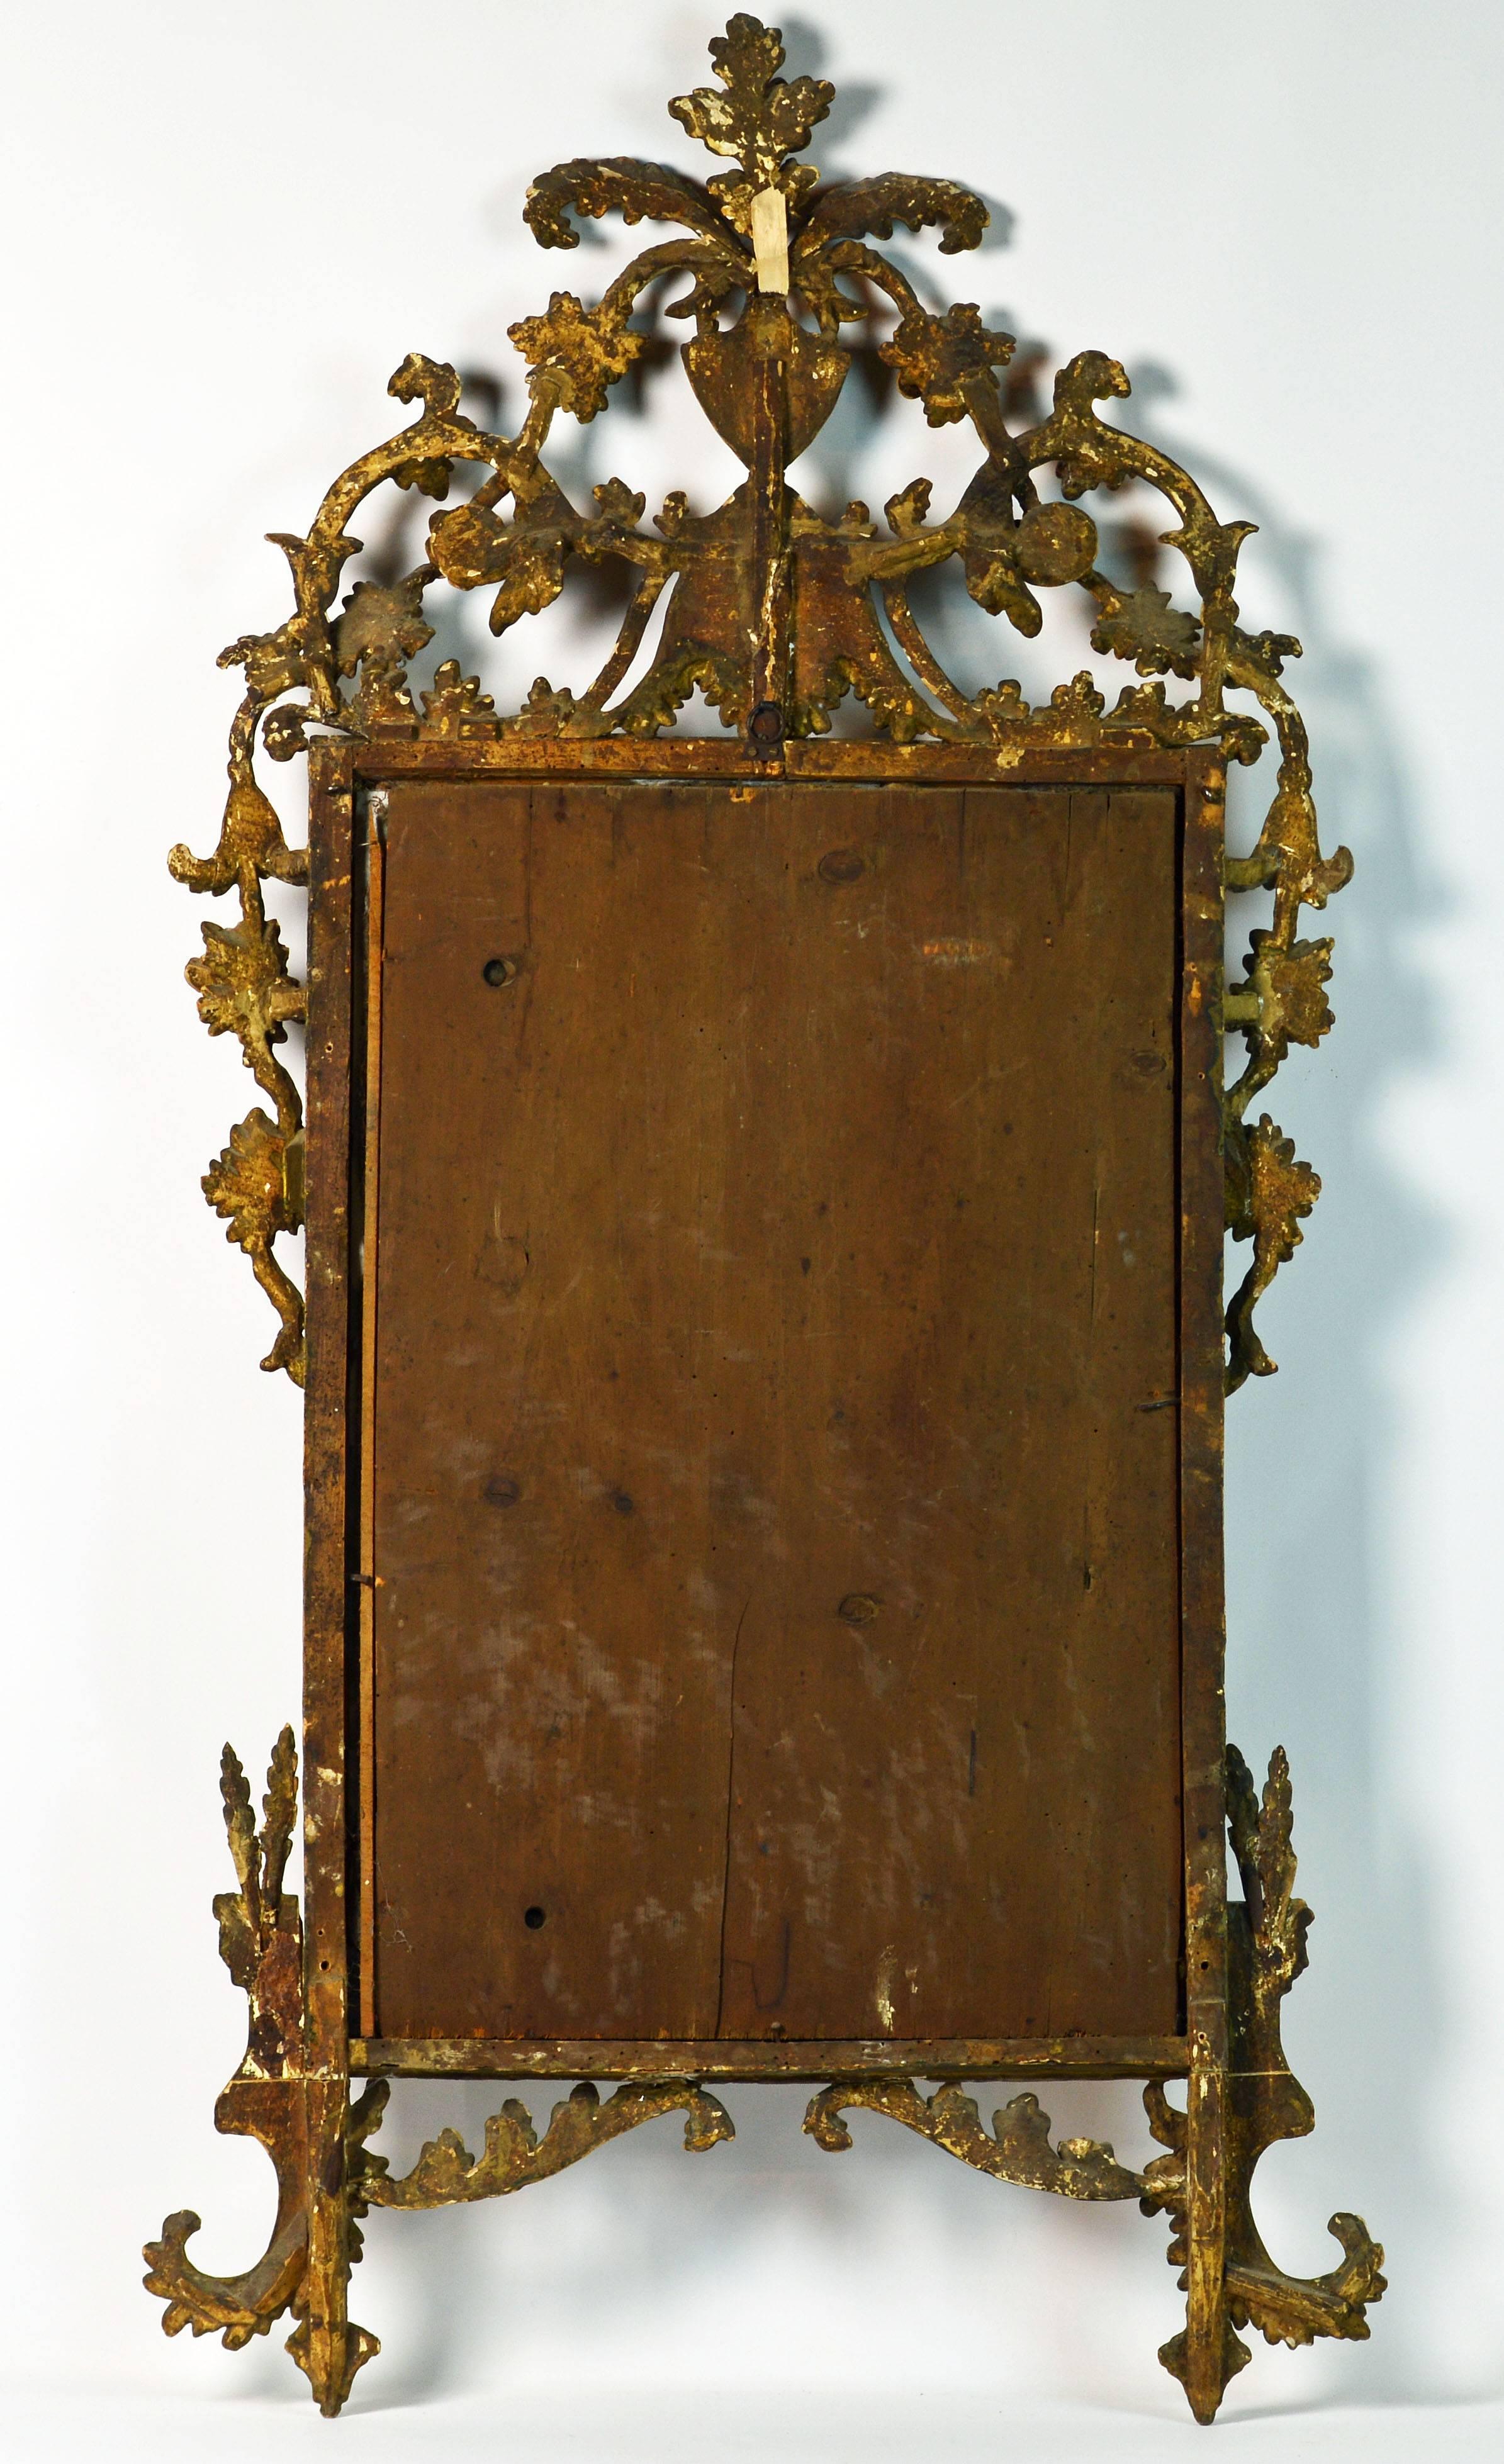 59 inches tall this extraordinary mirror features expansive openwork carvings of leaf work, figures, garlands, urns and scrolls in the rococo tradition. The glass is original and so is the painted surface with traces of gilt.